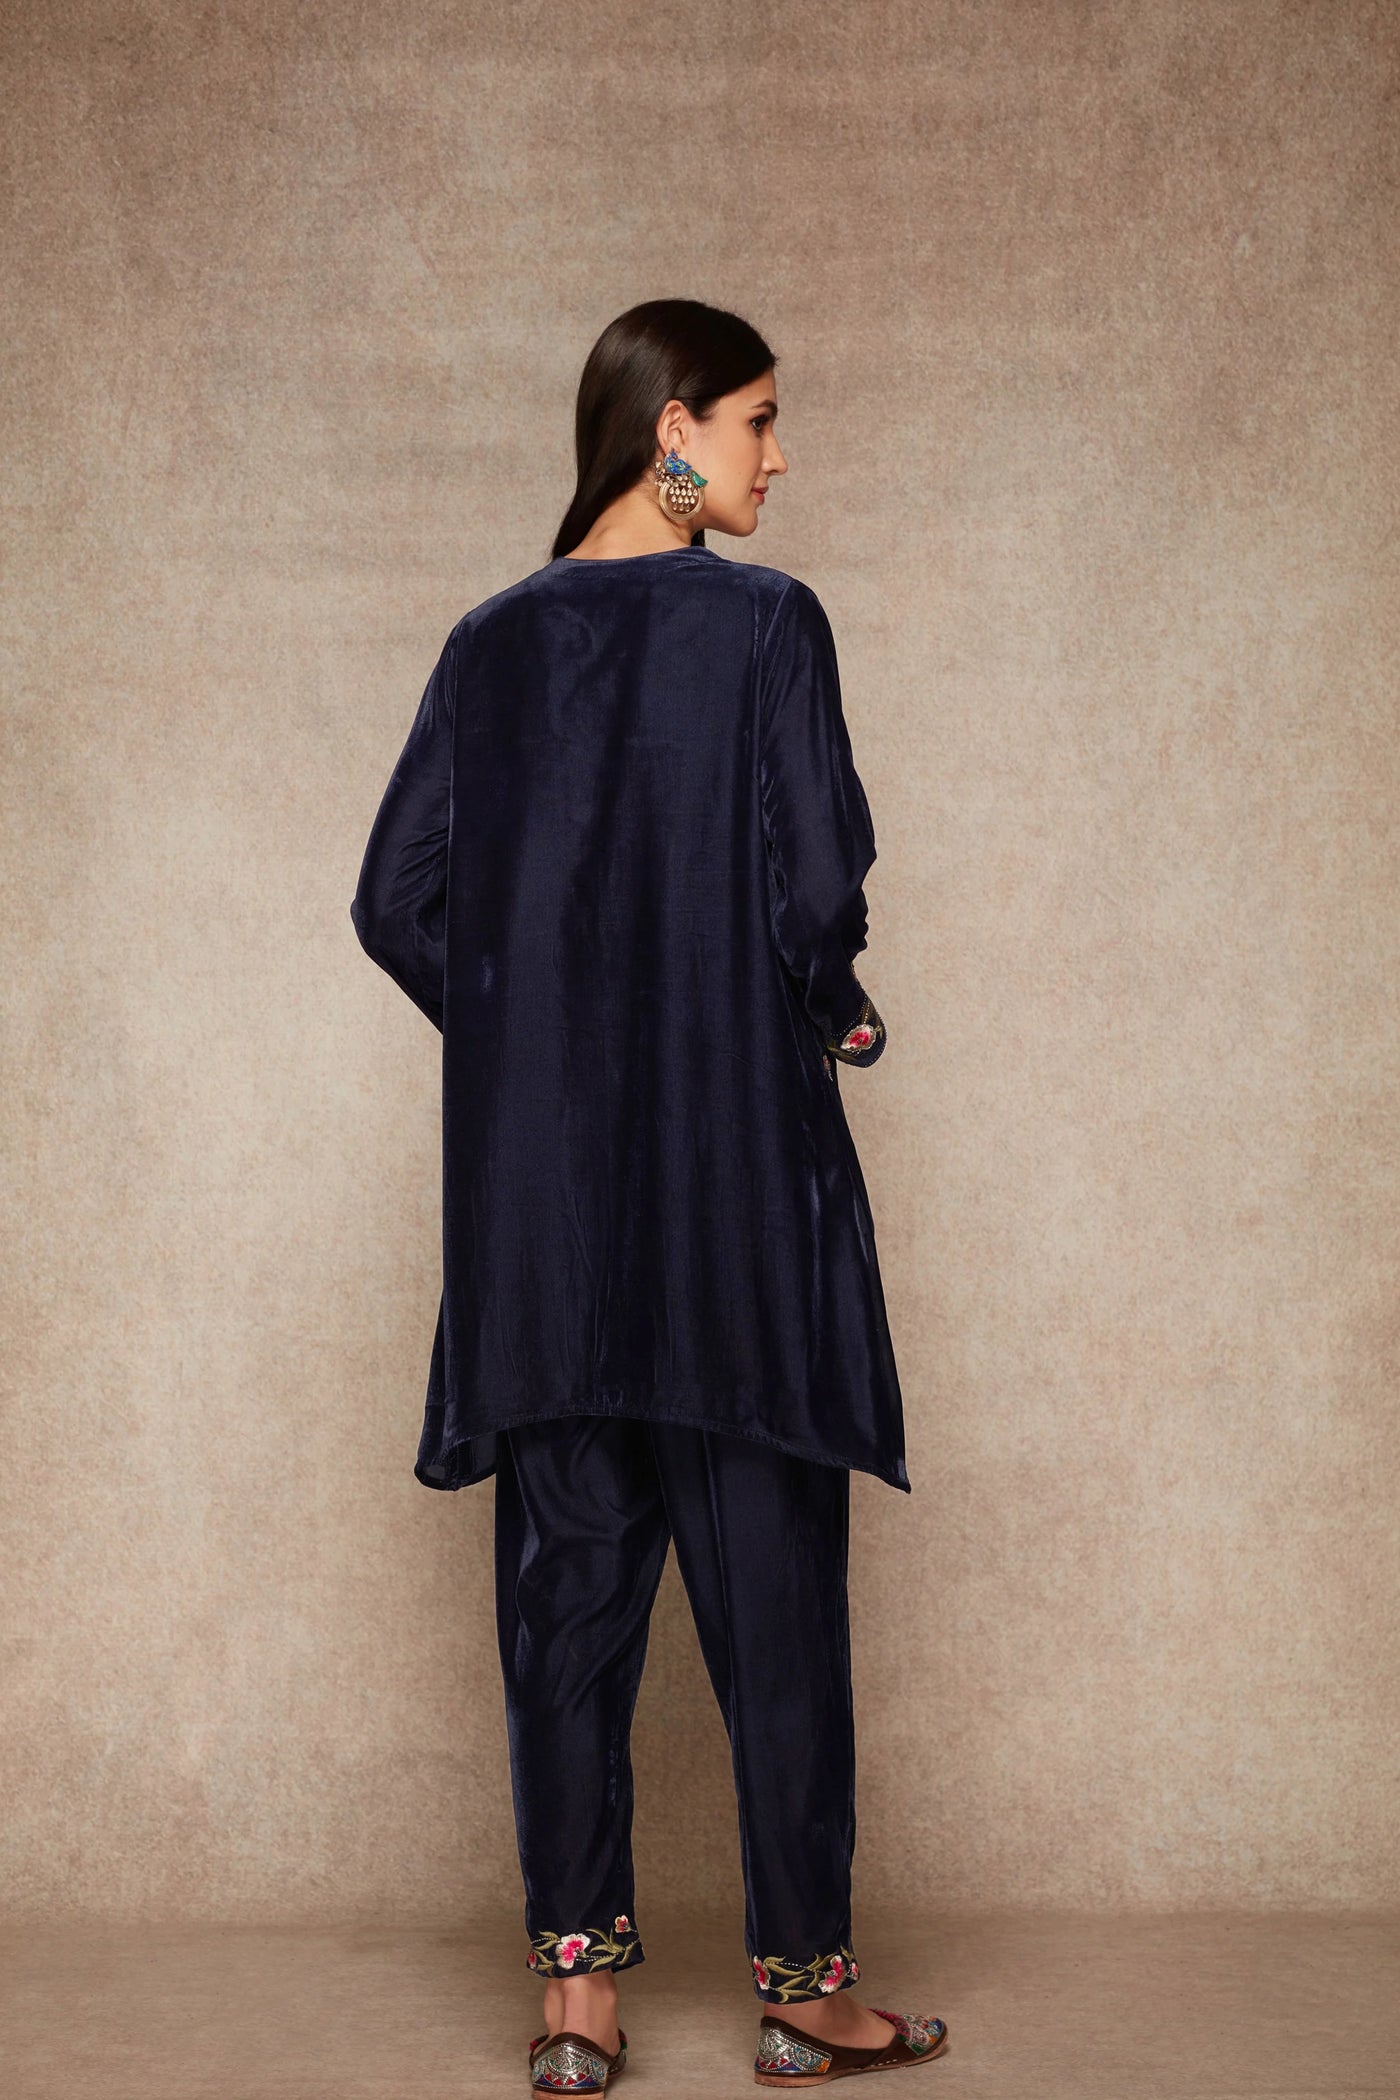 Navy kurta palazzo set Indian Clothing in Denver, CO, Aurora, CO, Boulder, CO, Fort Collins, CO, Colorado Springs, CO, Parker, CO, Highlands Ranch, CO, Cherry Creek, CO, Centennial, CO, and Longmont, CO. NATIONWIDE SHIPPING USA- India Fashion X